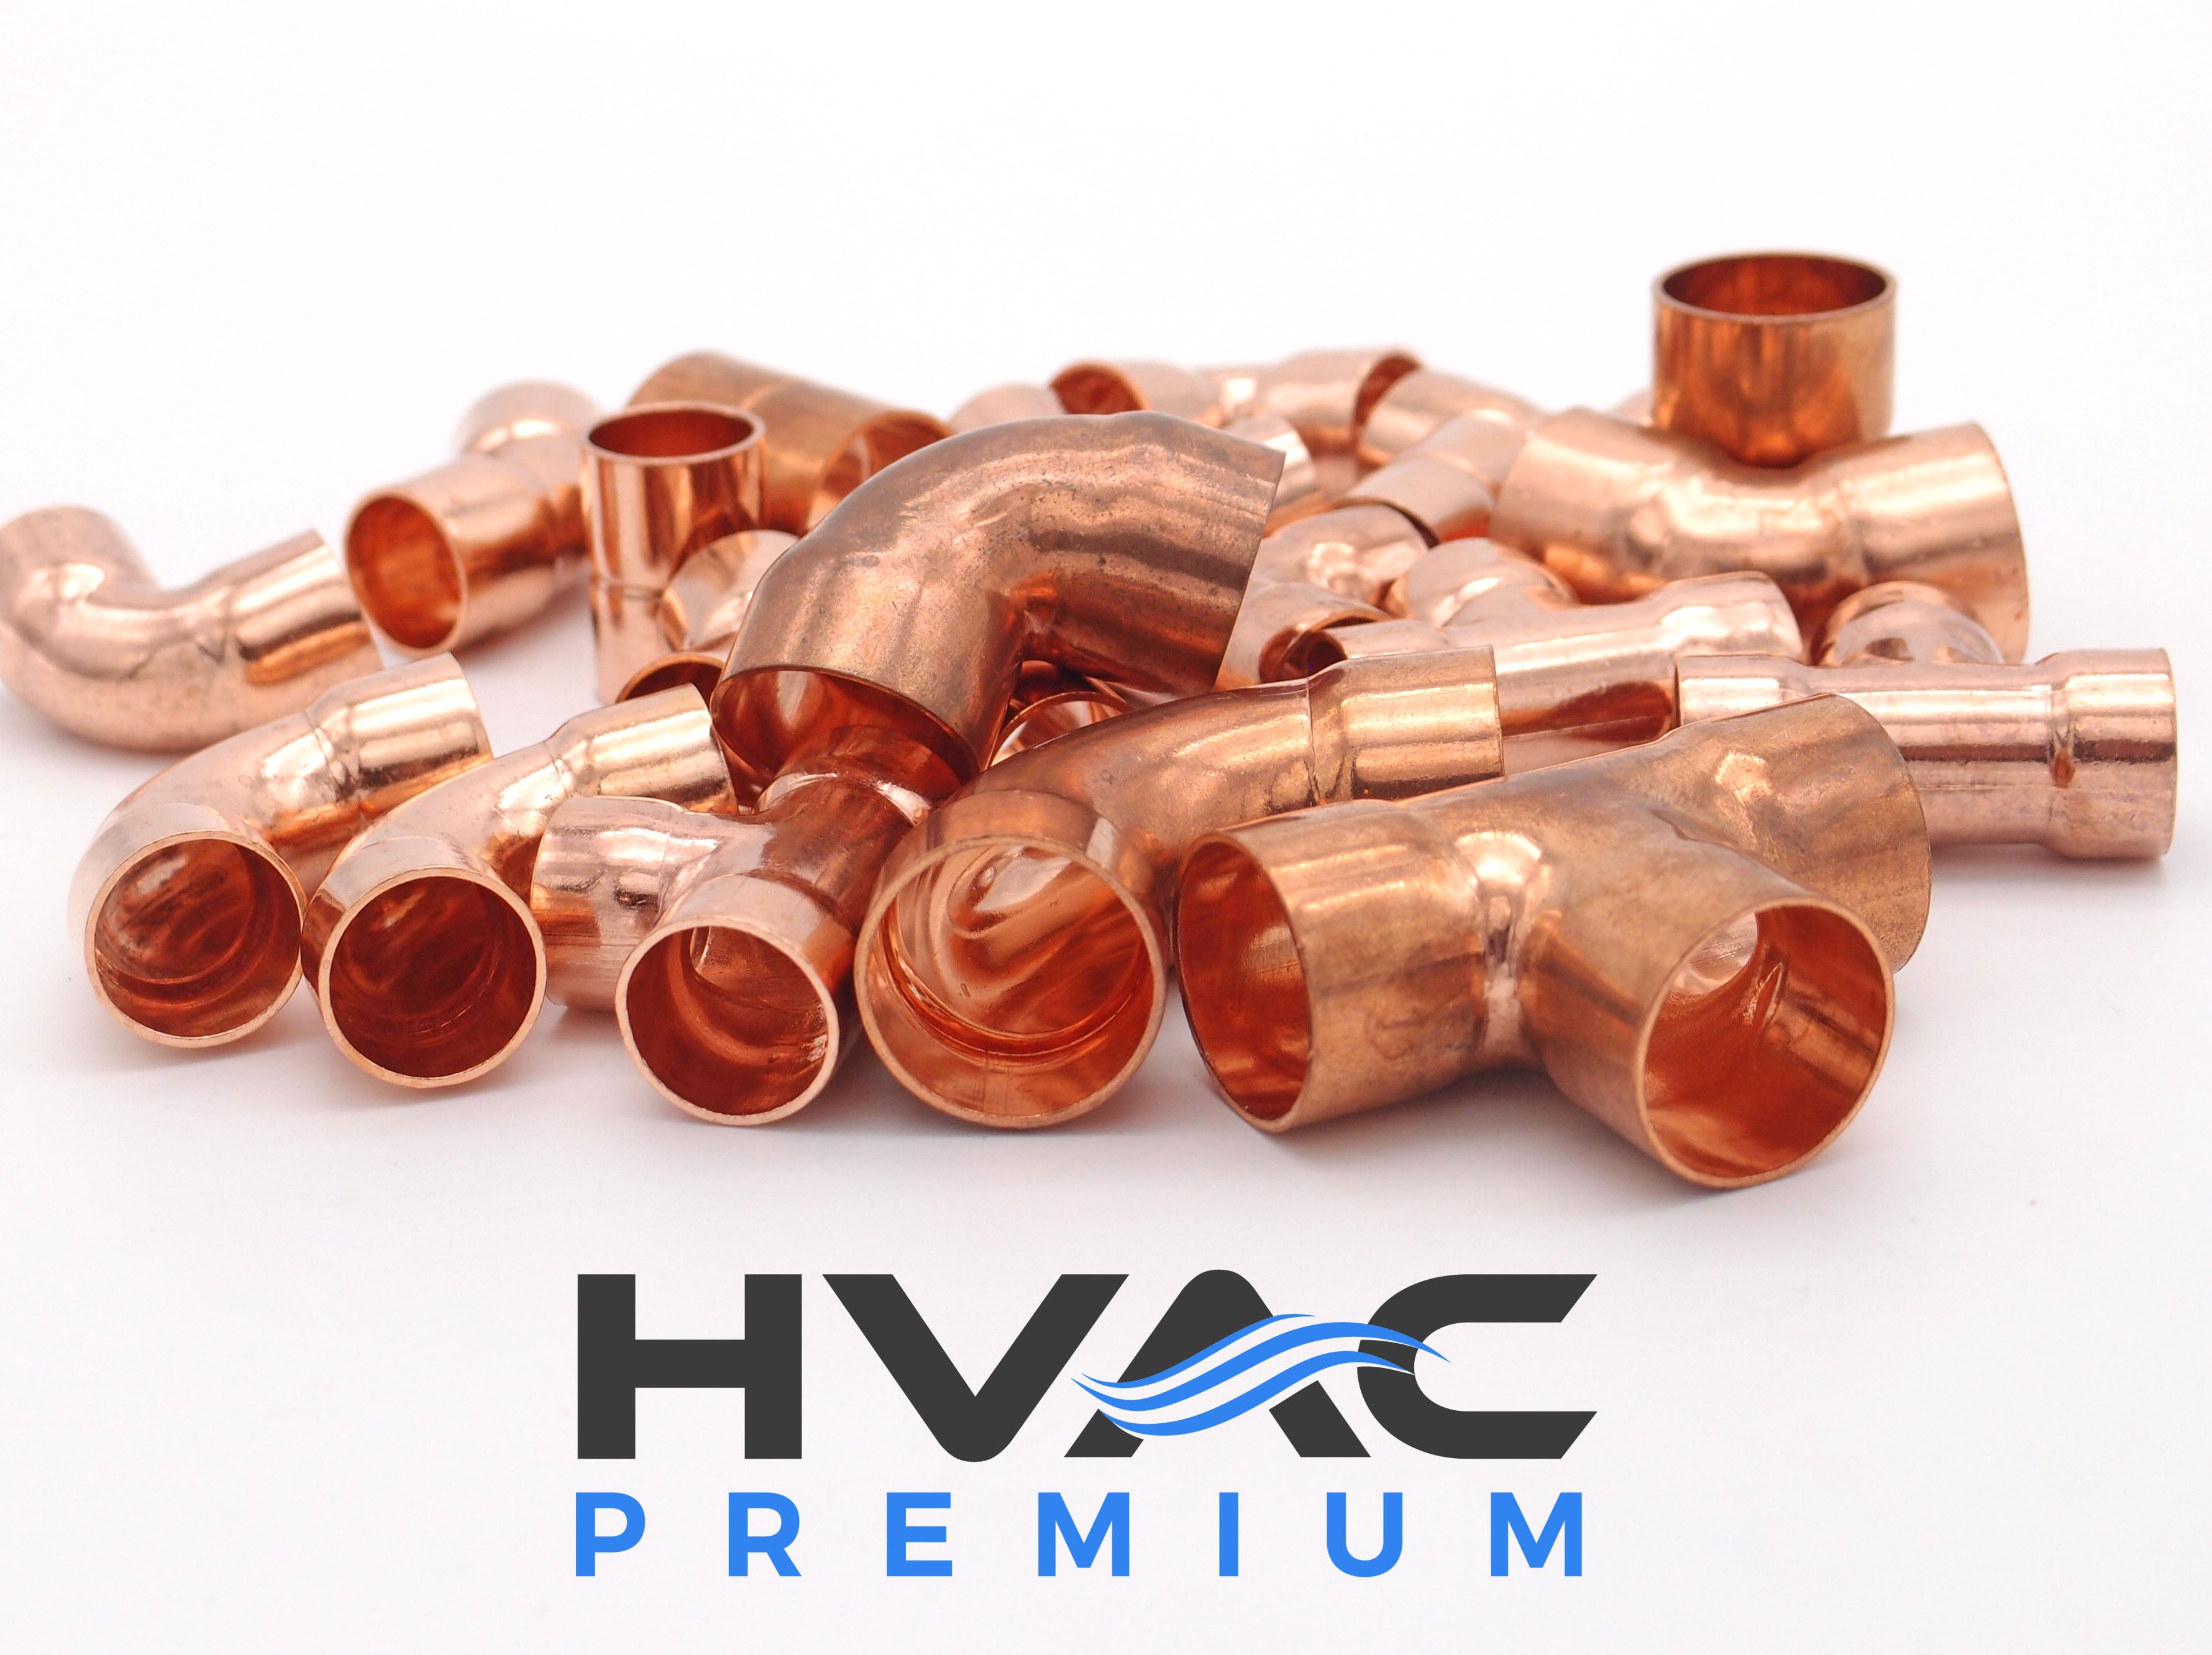 Copper Fitting 1/2 Inch (HVAC Outer Dimension) 3/8 Inch (Plumbing Inner Dimension) - Straight Copper Coupling Fittings With Rolled Tube Stop & HVAC – 99.9% Pure Copper - 10 Pack